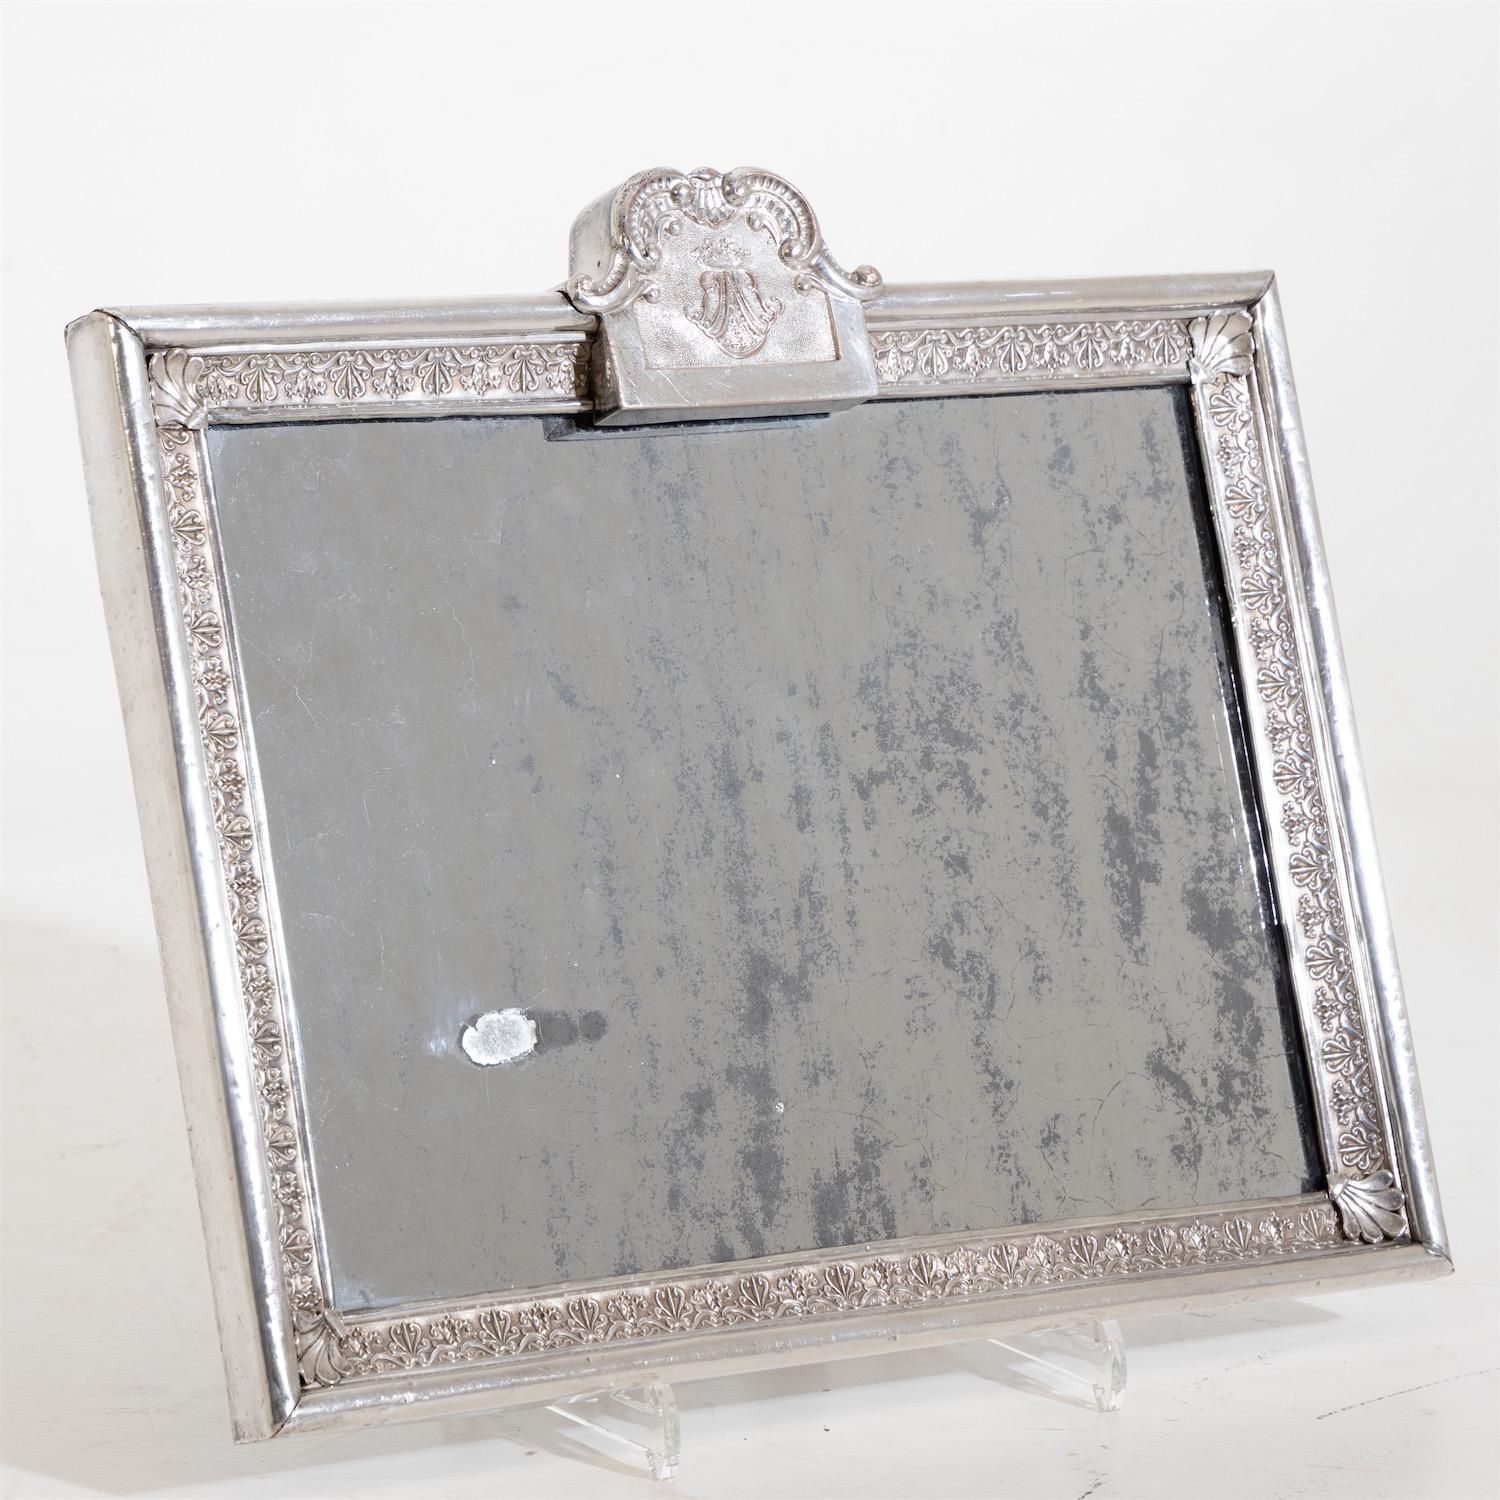 Silver plated metal frame with partly blind mirror glass and monogram in rocaille cartouche. Prov: from the estate of the Barons von Kühlemann-Stumm.